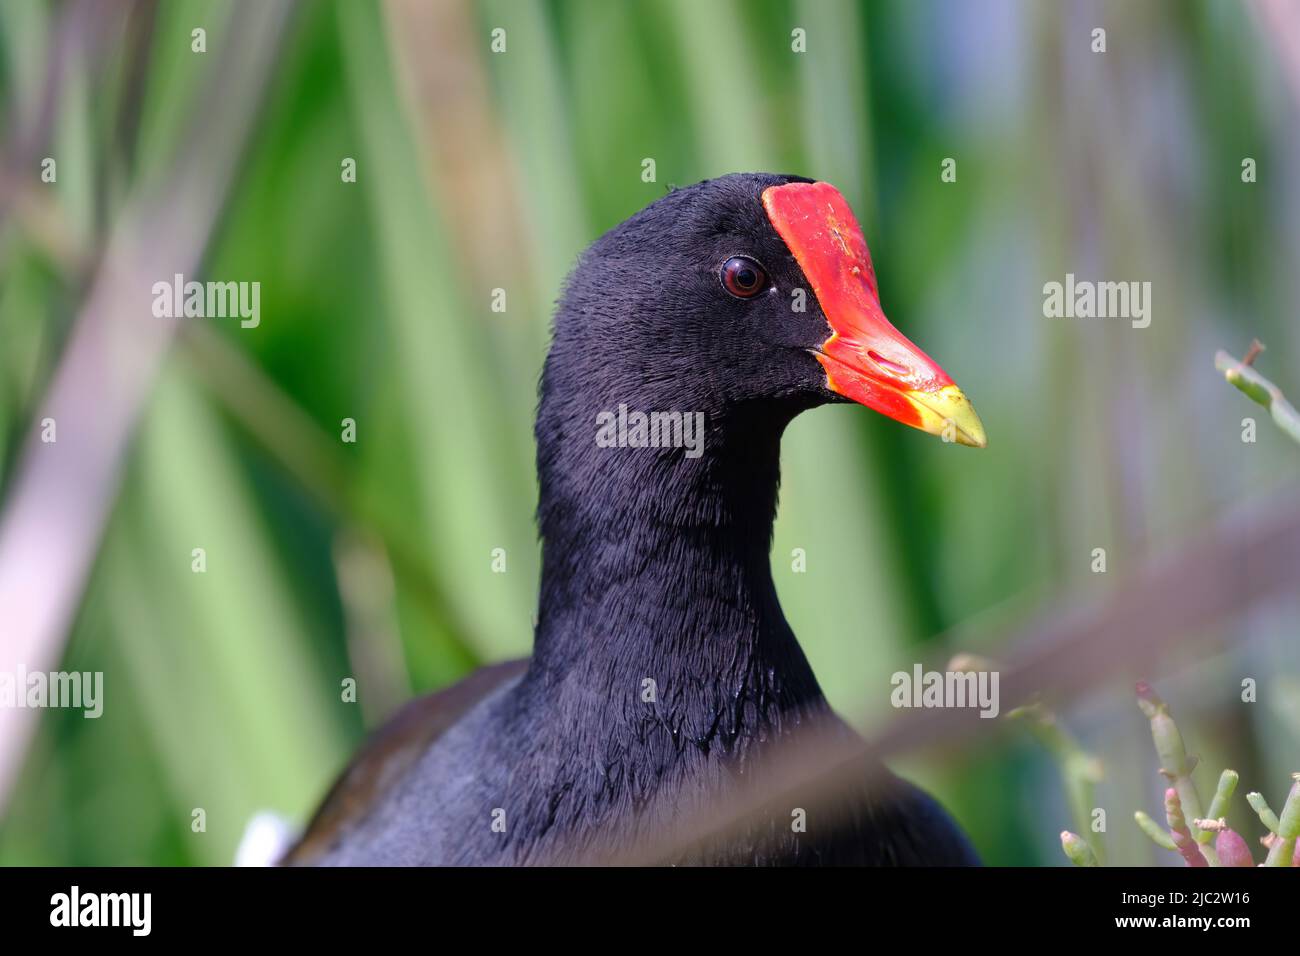 Common Gallinule (Gallinula galeata), detailed portrait of a beautiful moorhen perched among the reeds of the wetland. Stock Photo